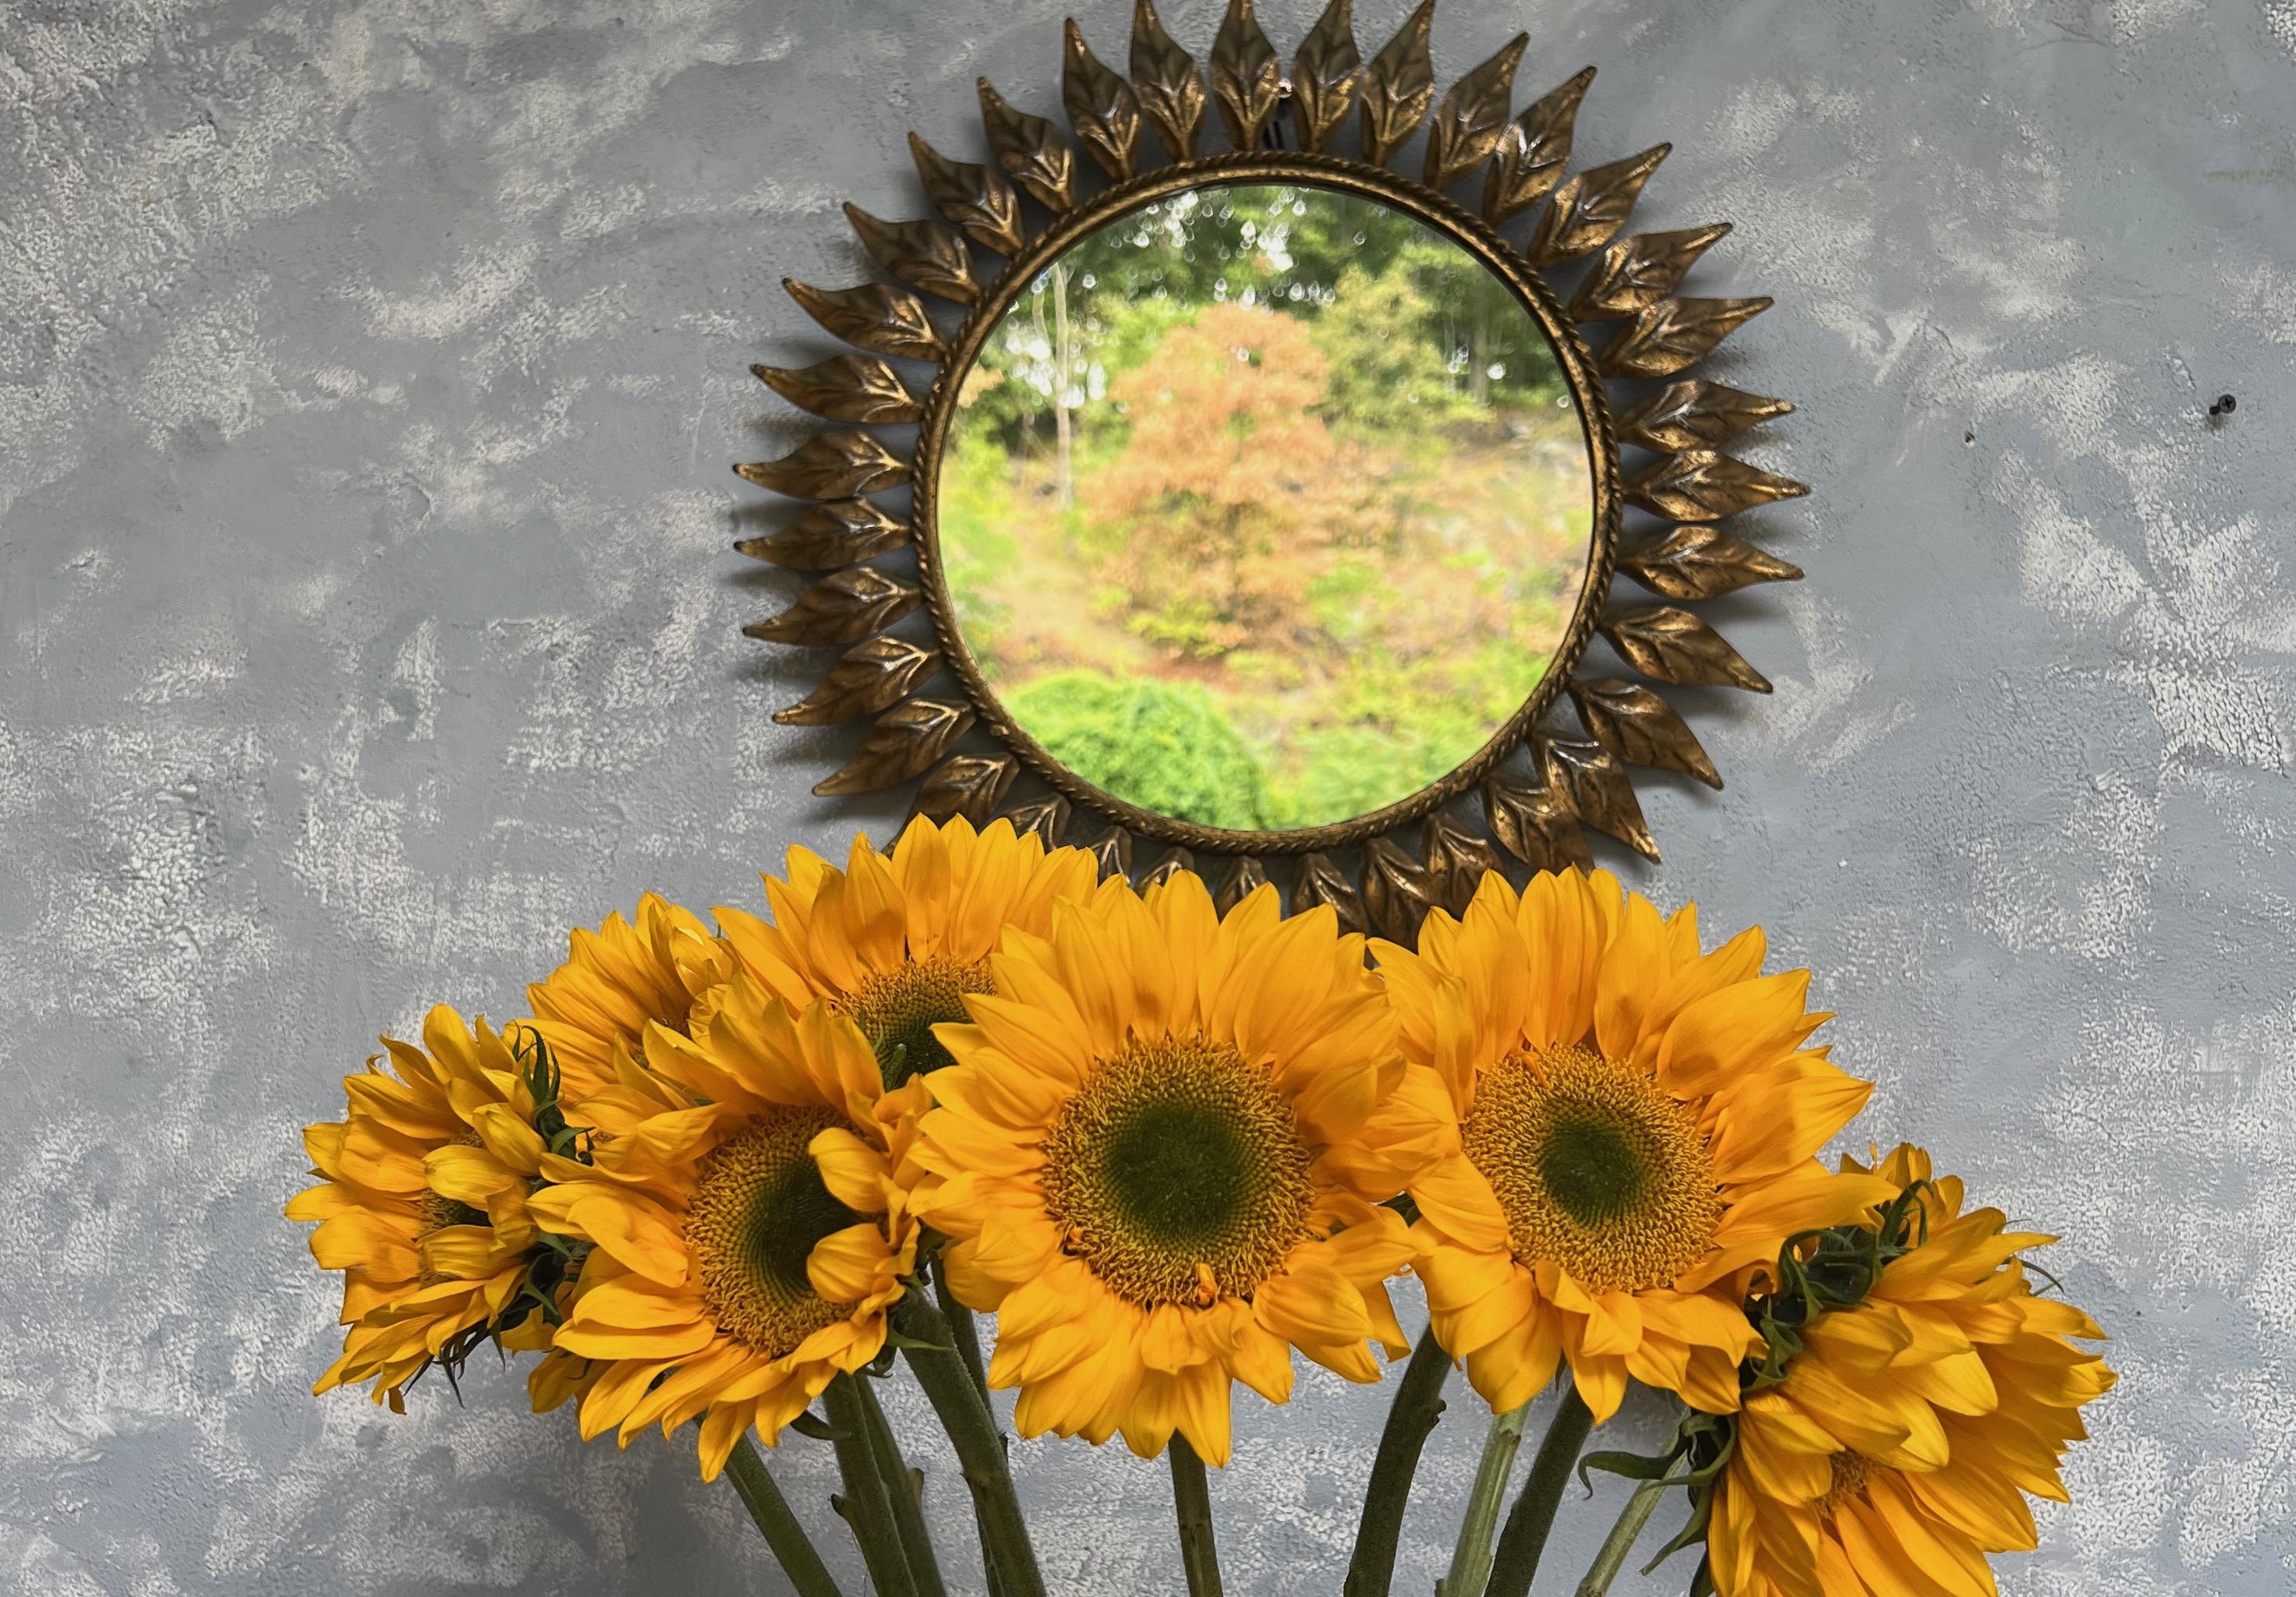 A Spanish 1950s sunburst mirror with tightly placed leaves or rays. This stunning Spanish sunburst mirror from the 1950s exudes whimsy and elegance. The tightly placed leaves or rays that emanate from its center create a sense of energy and